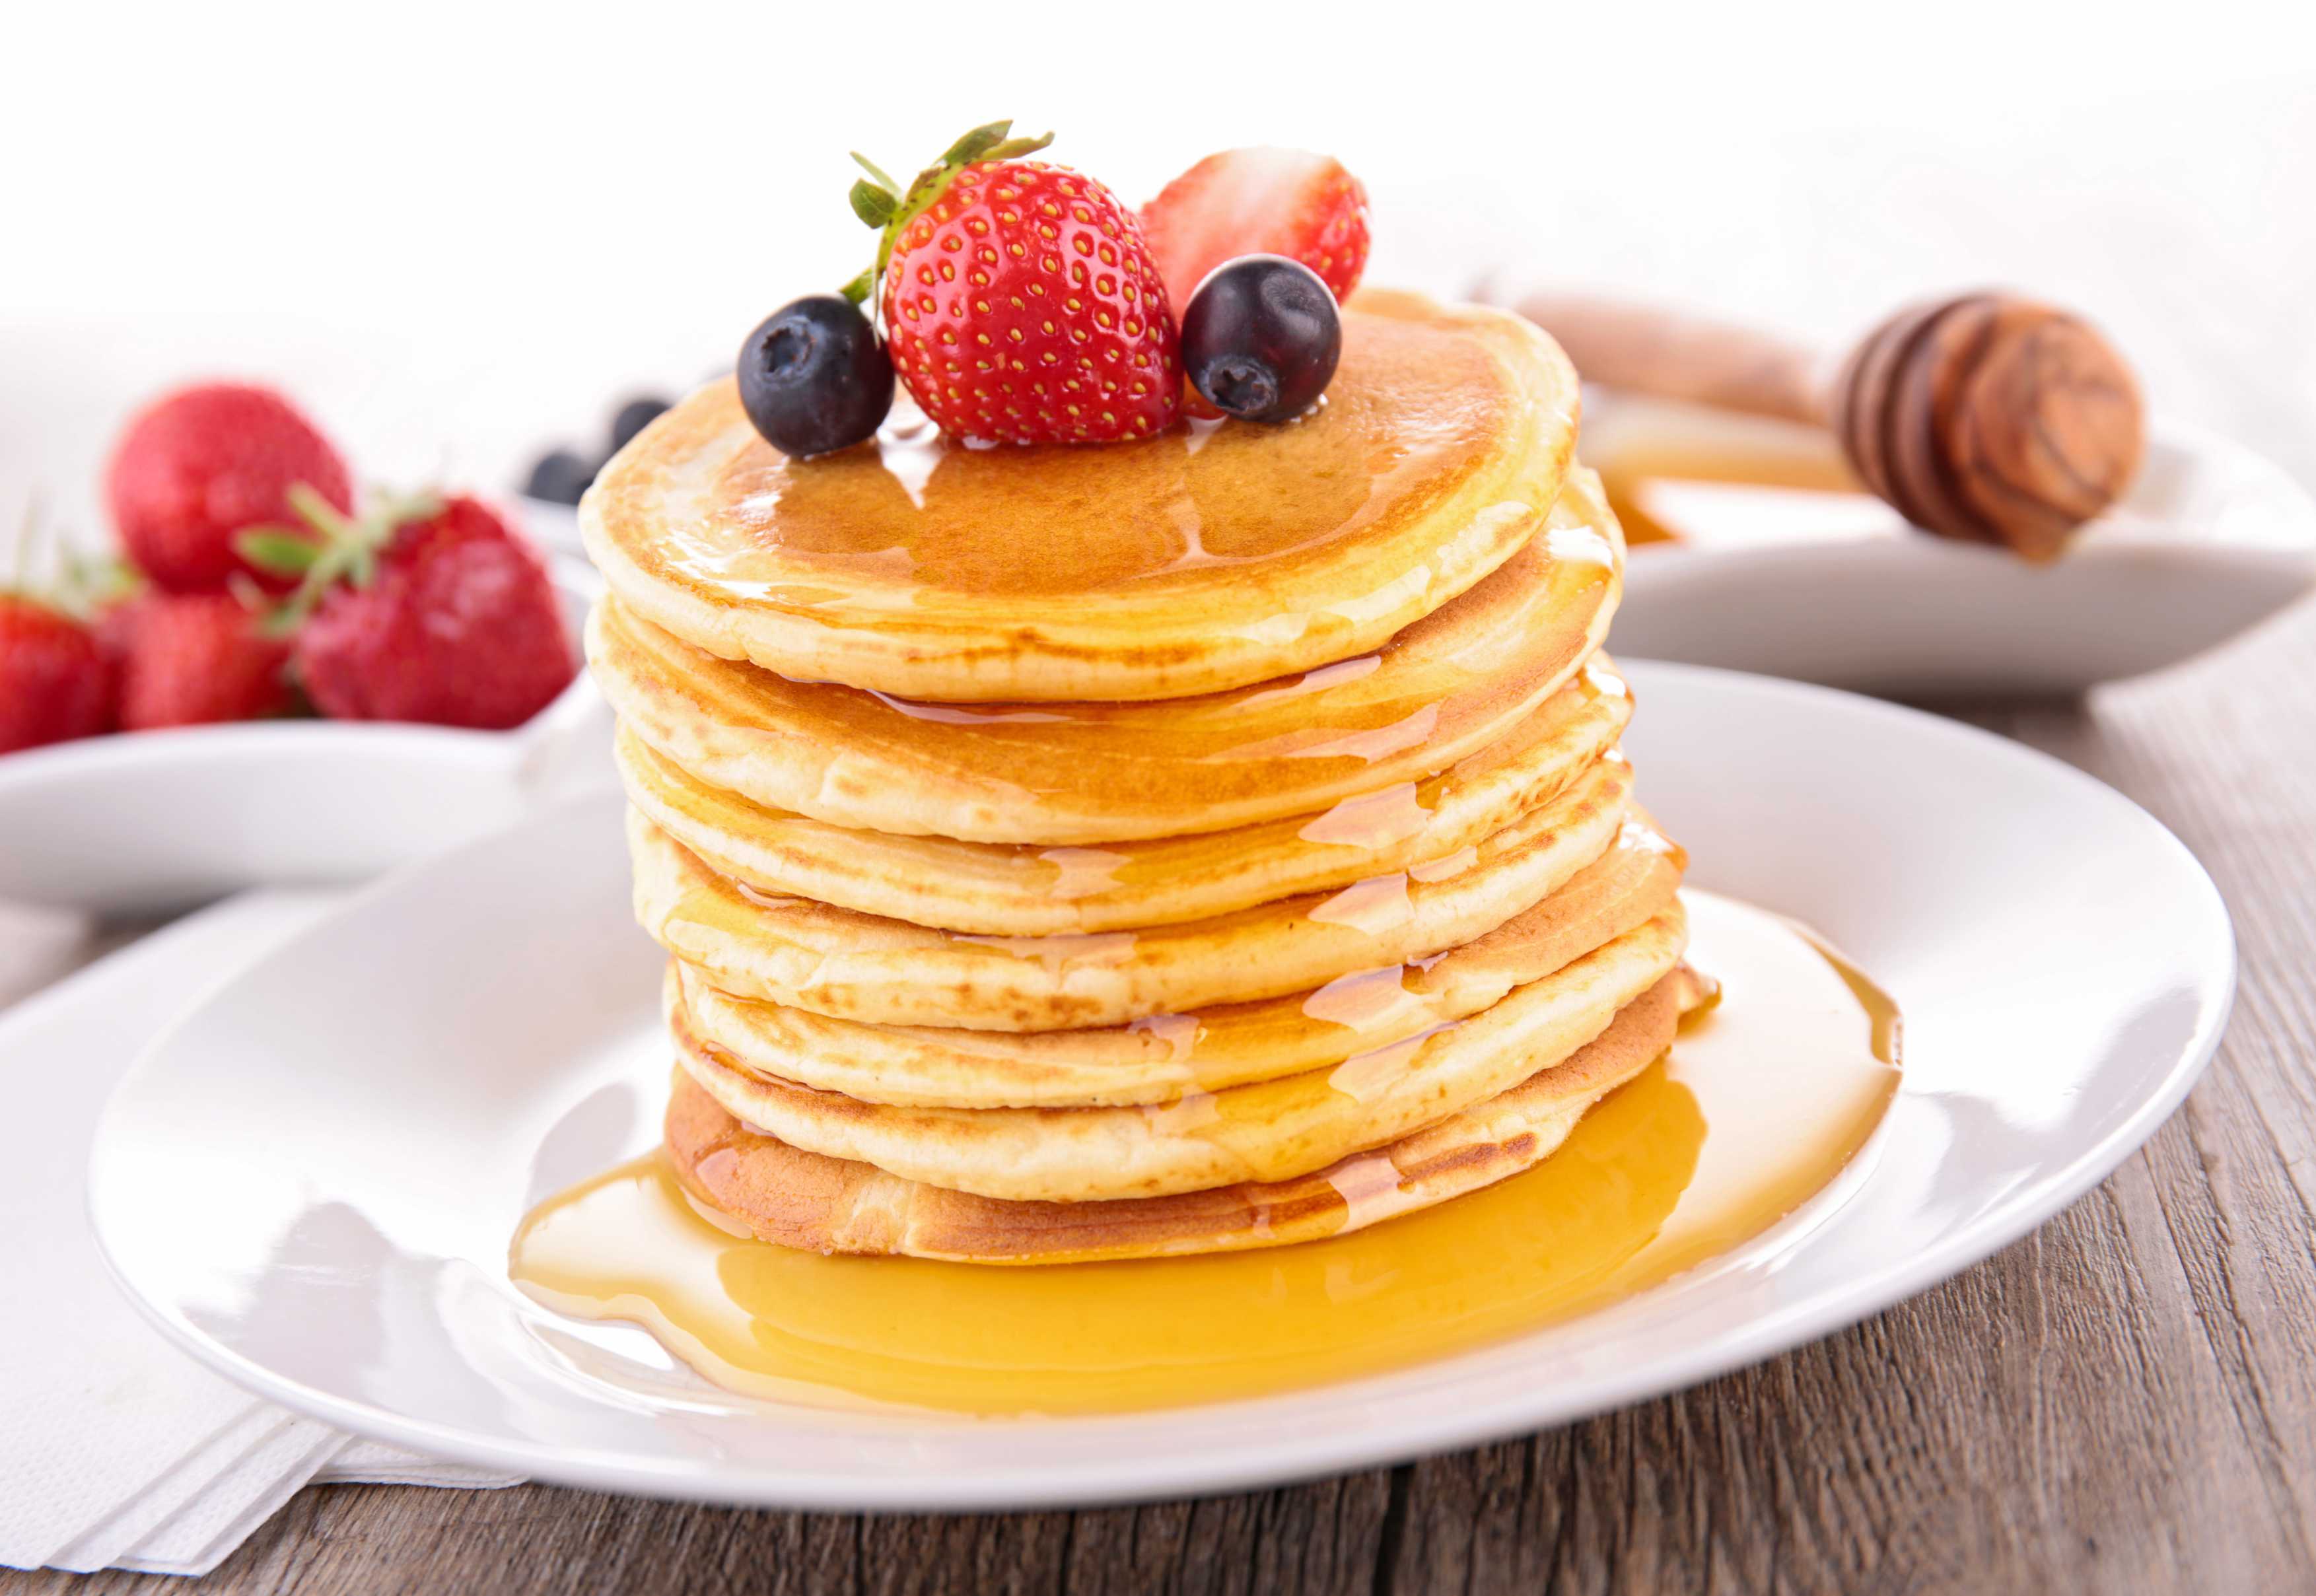 Pancakes | The Meaning Of Pancakes In Dream - Dream Interpretation